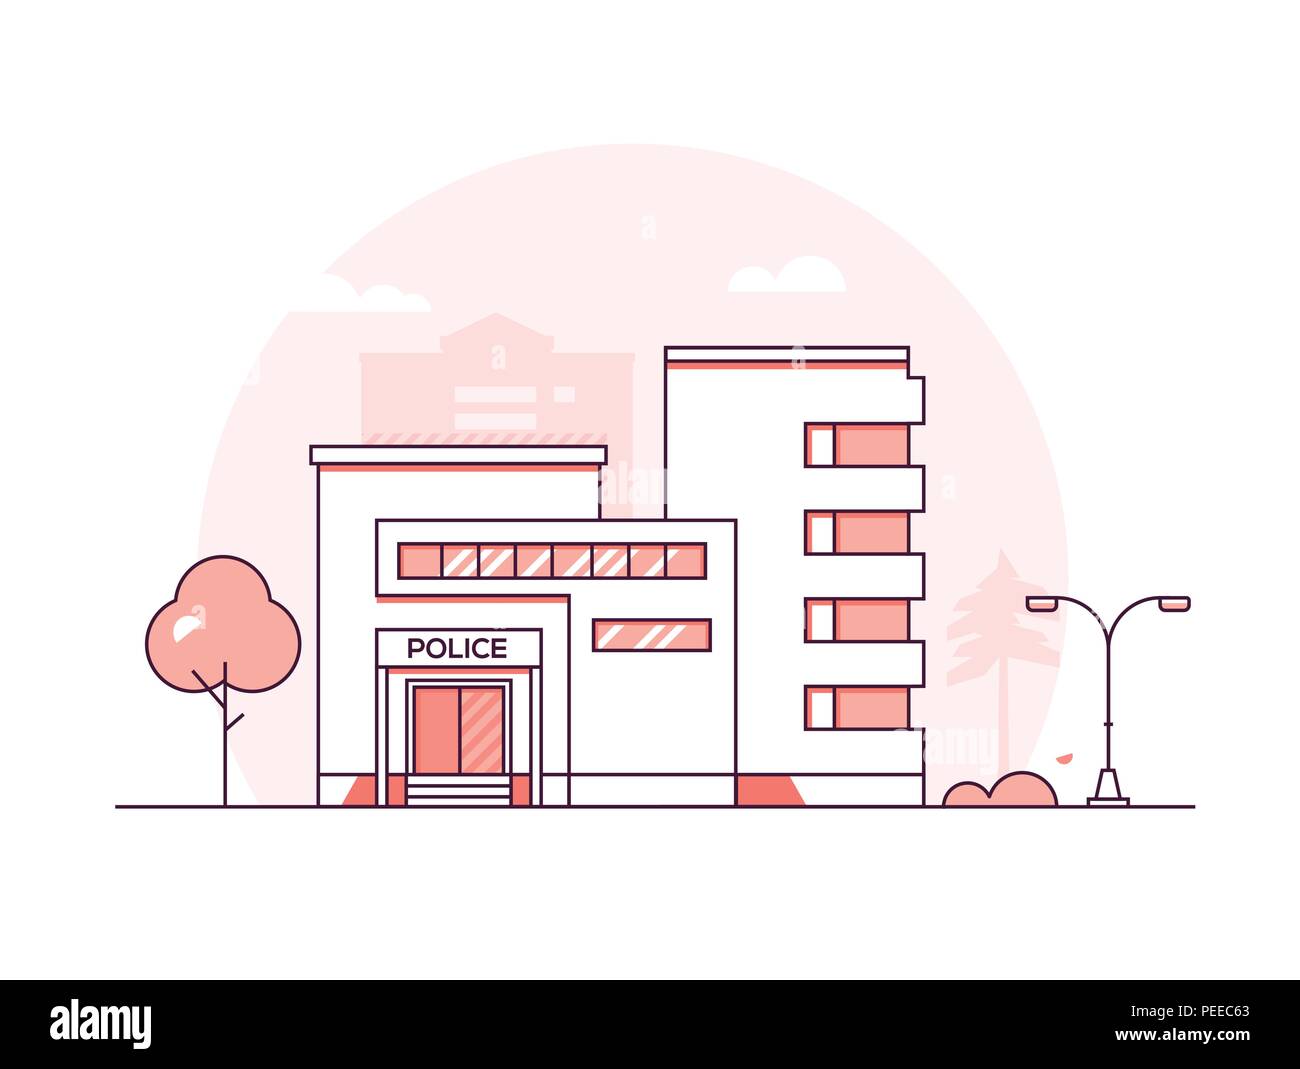 Police station - modern thin line design style vector illustration on white urban background. Red colored high quality composition with a facade of de Stock Vector